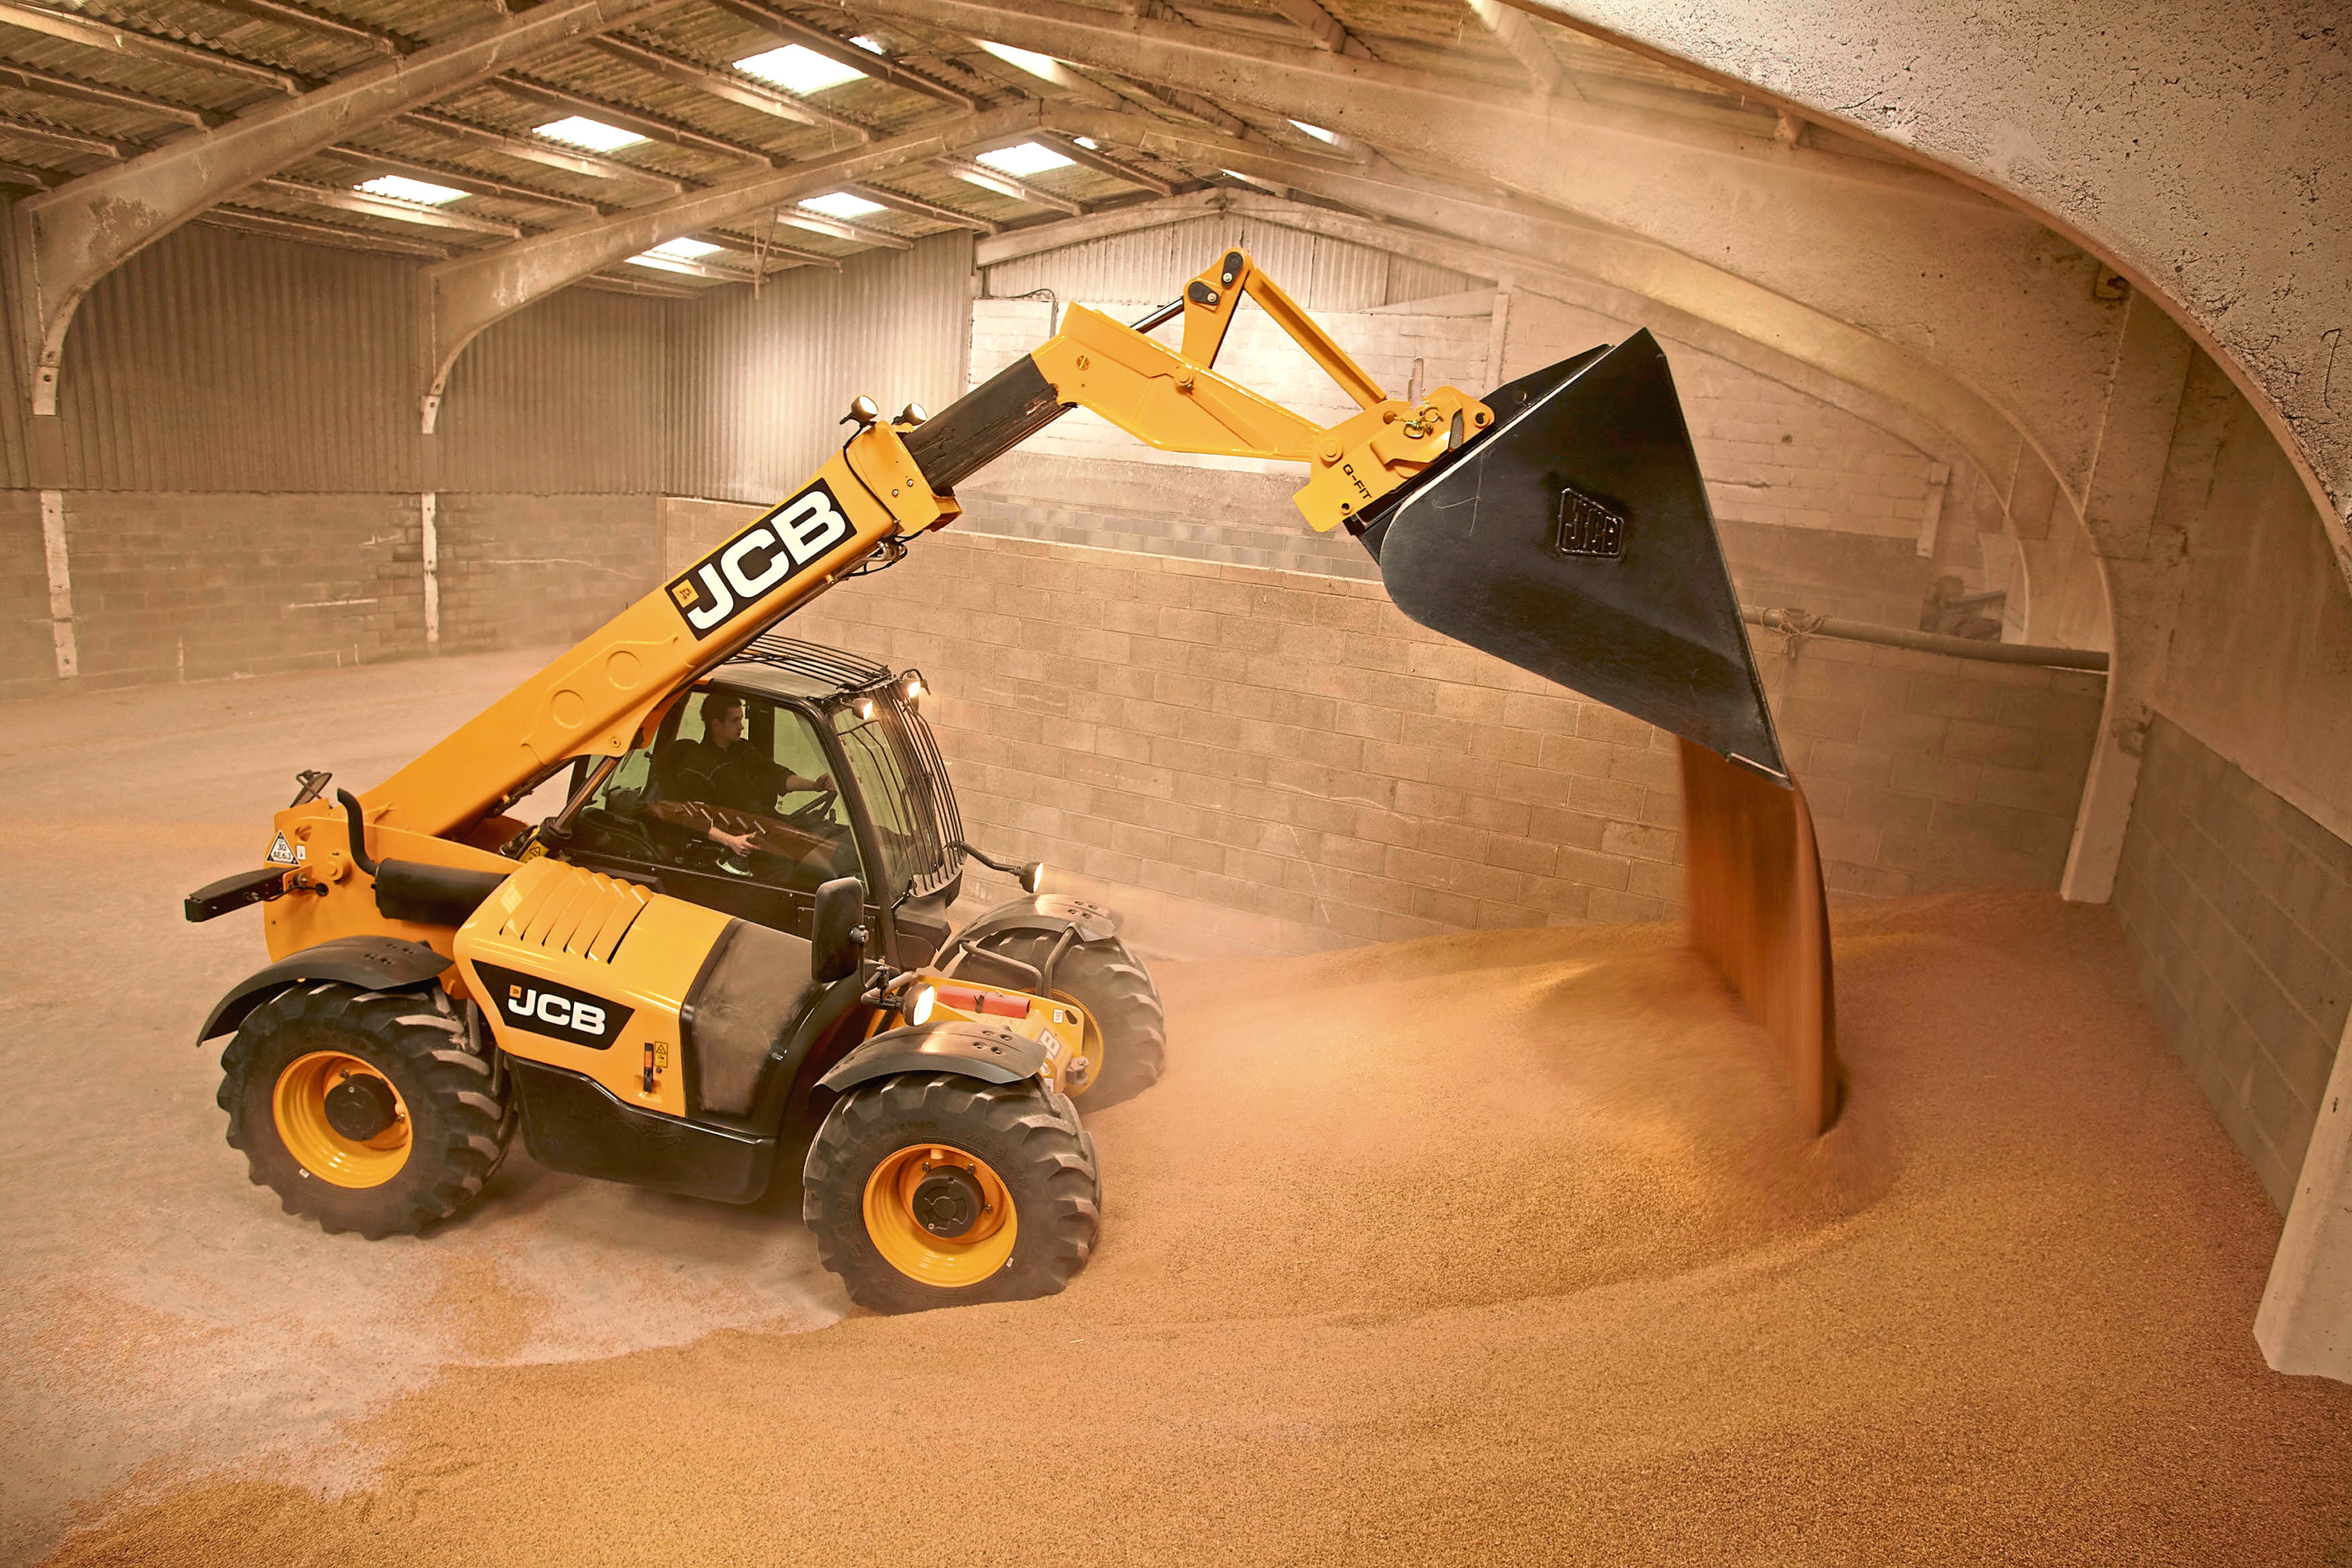 The 531-70 JCB Loadall in action on farm